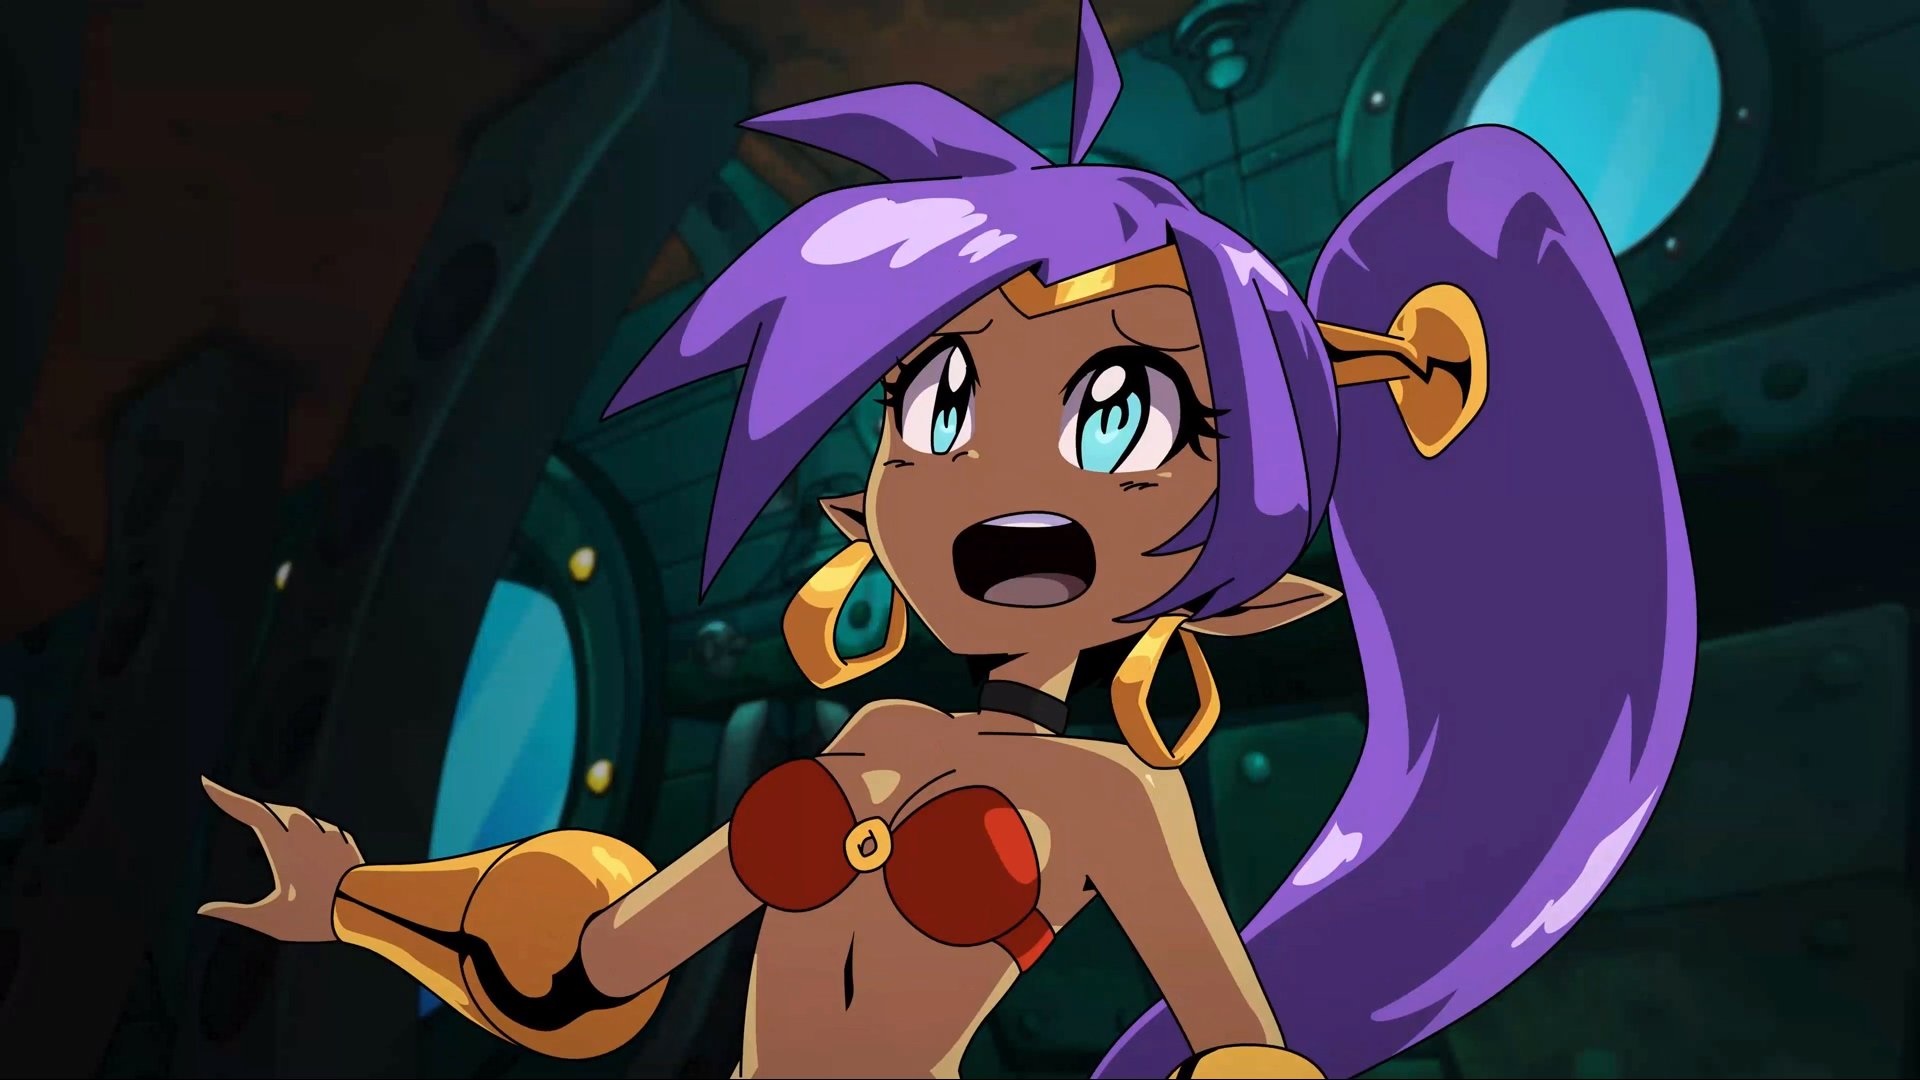 shantae and the seven sirens switch release date